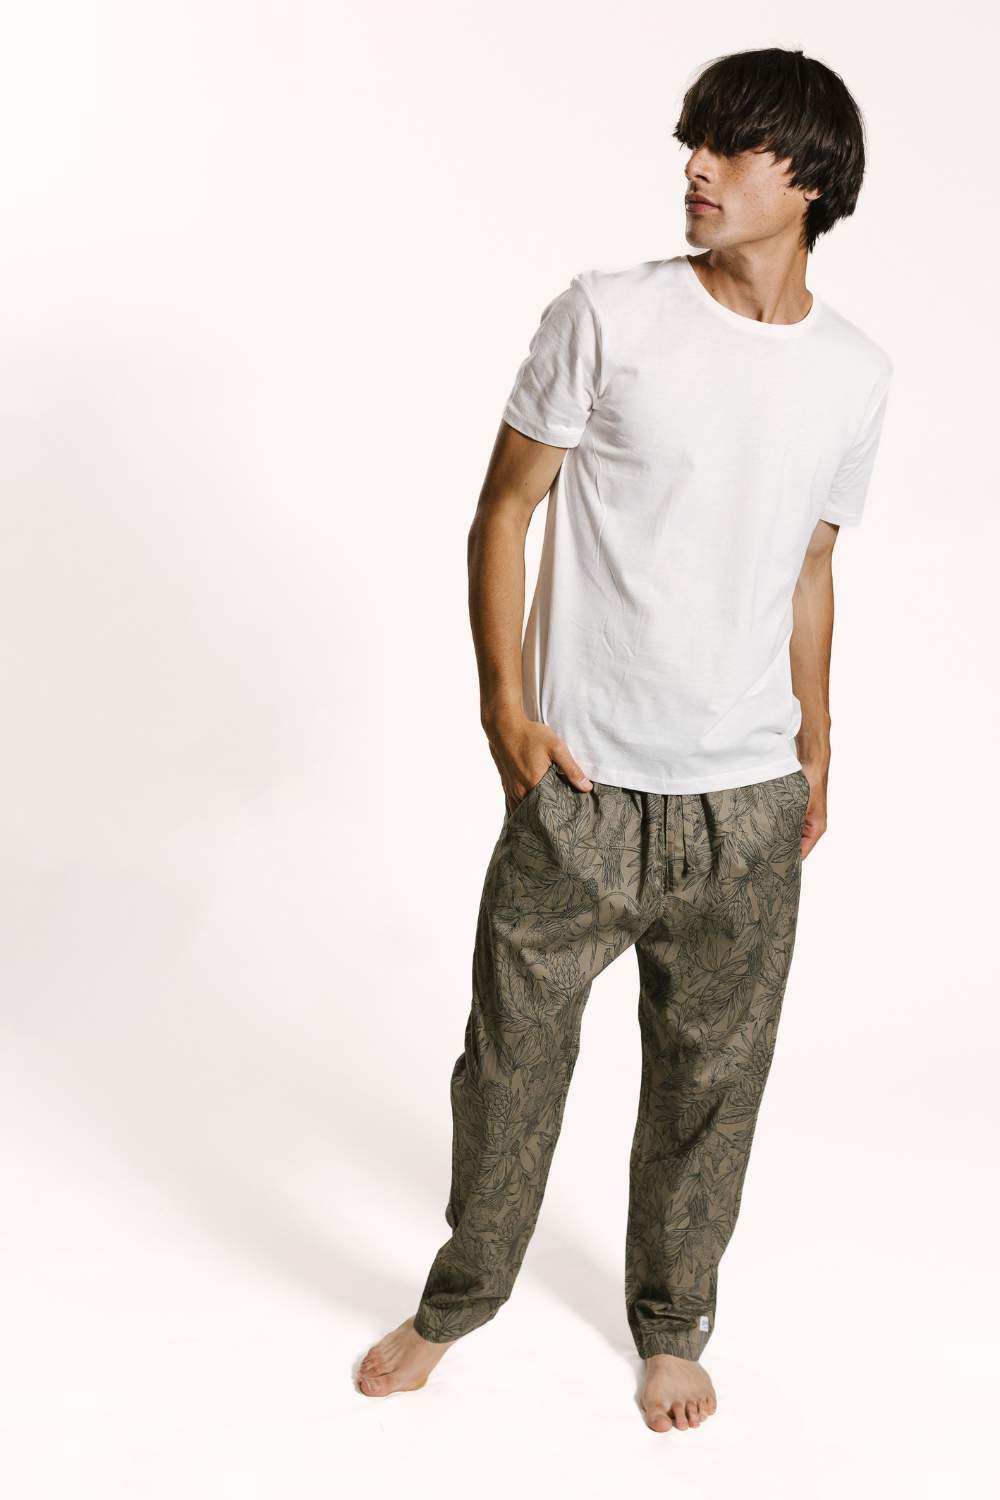 Mens moluccan cockatoo pyjama bottoms paired with white classic t-shirt